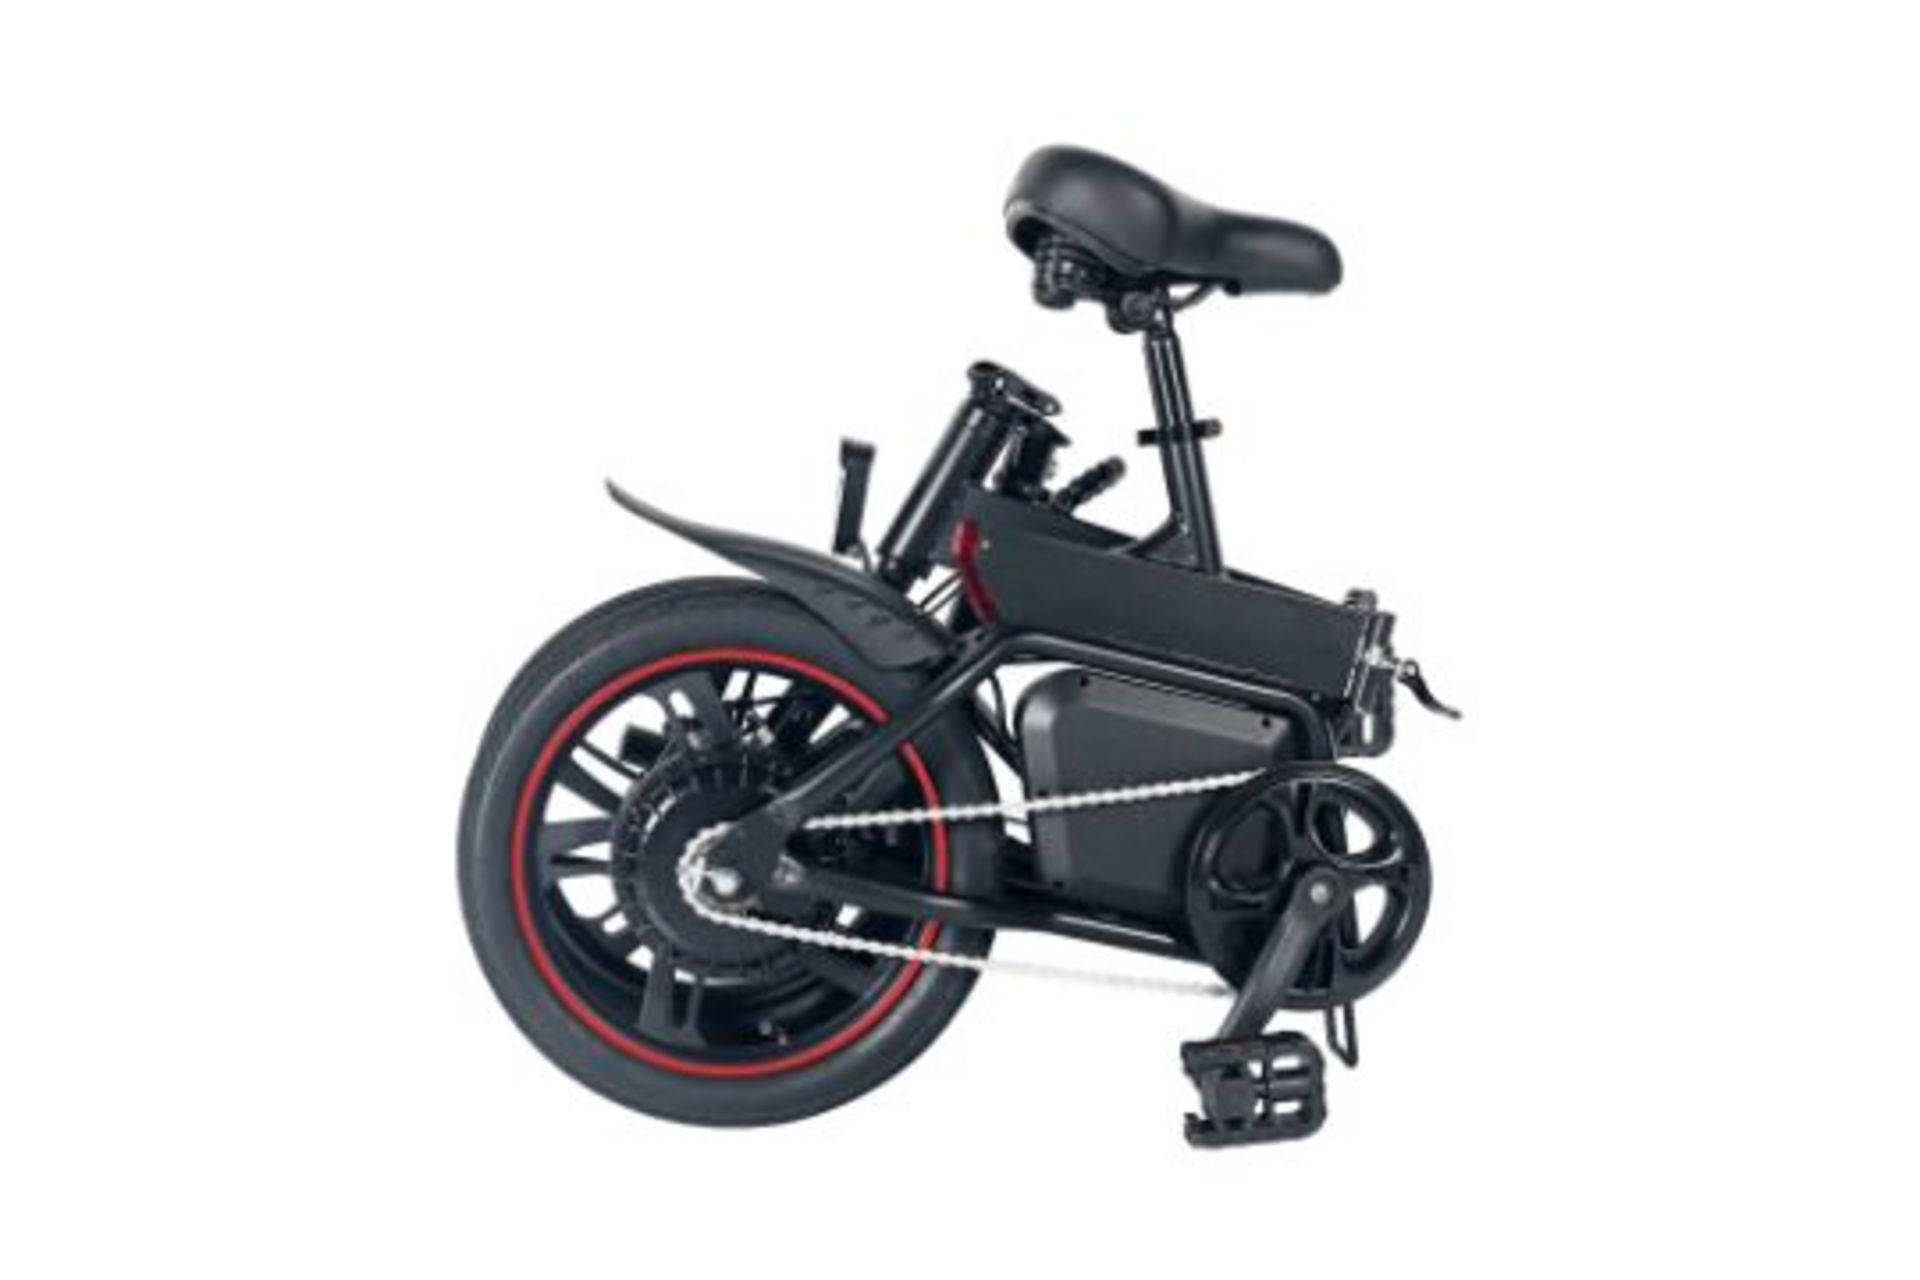 5 x Windgoo B20 Pro Electric Bike. RRP £1,100.99. With 16-inch-wide tires and a frame of - Image 2 of 2